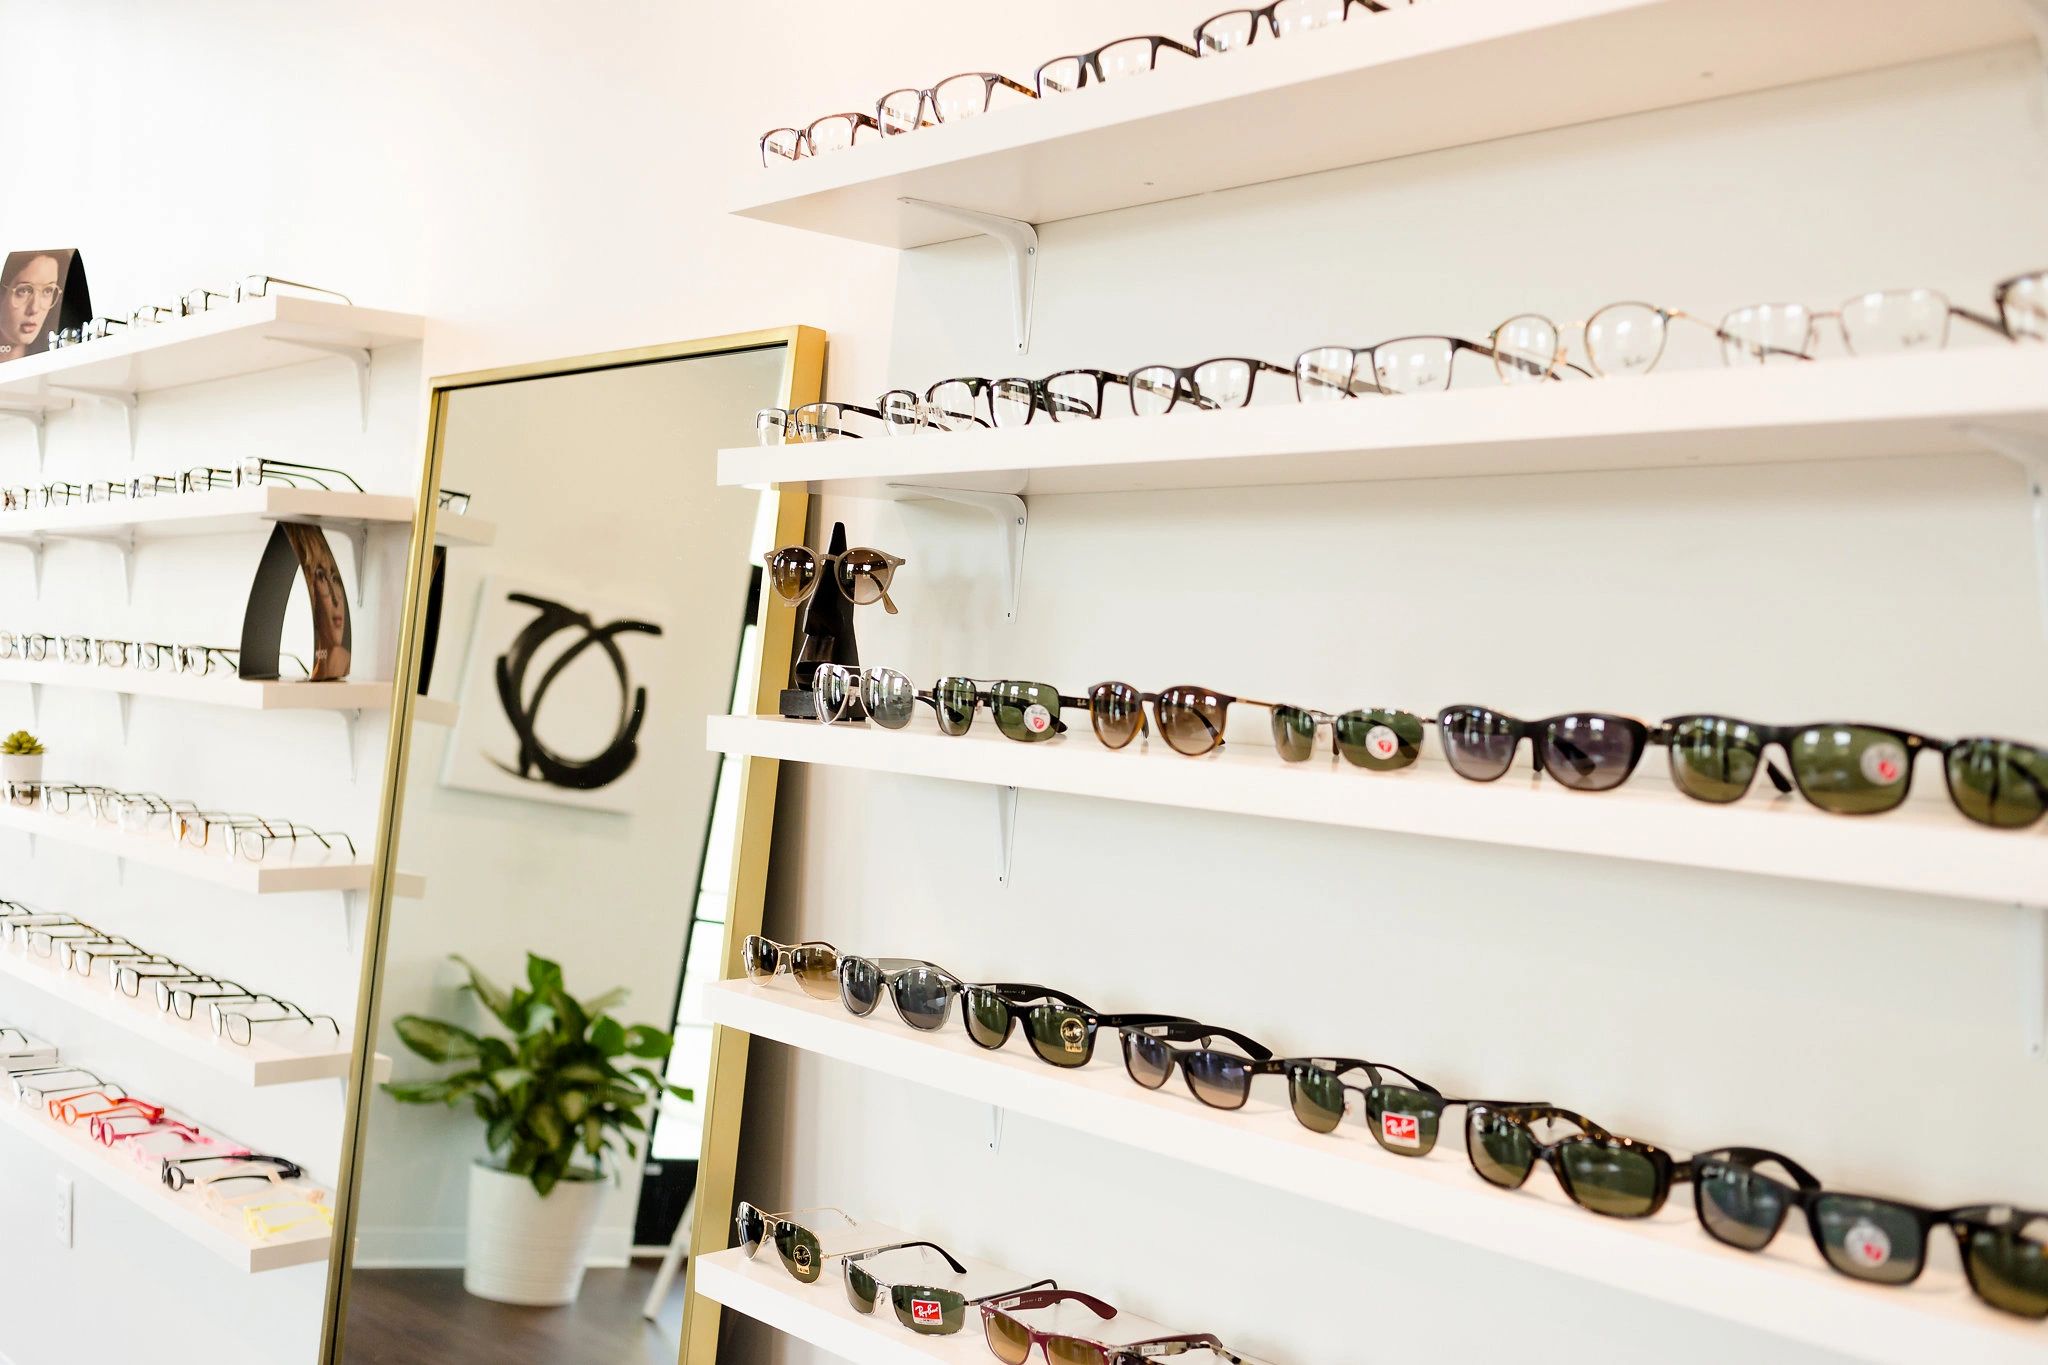 Stewart Family Eye Care - Optometrist, Glasses and Contact Lenses